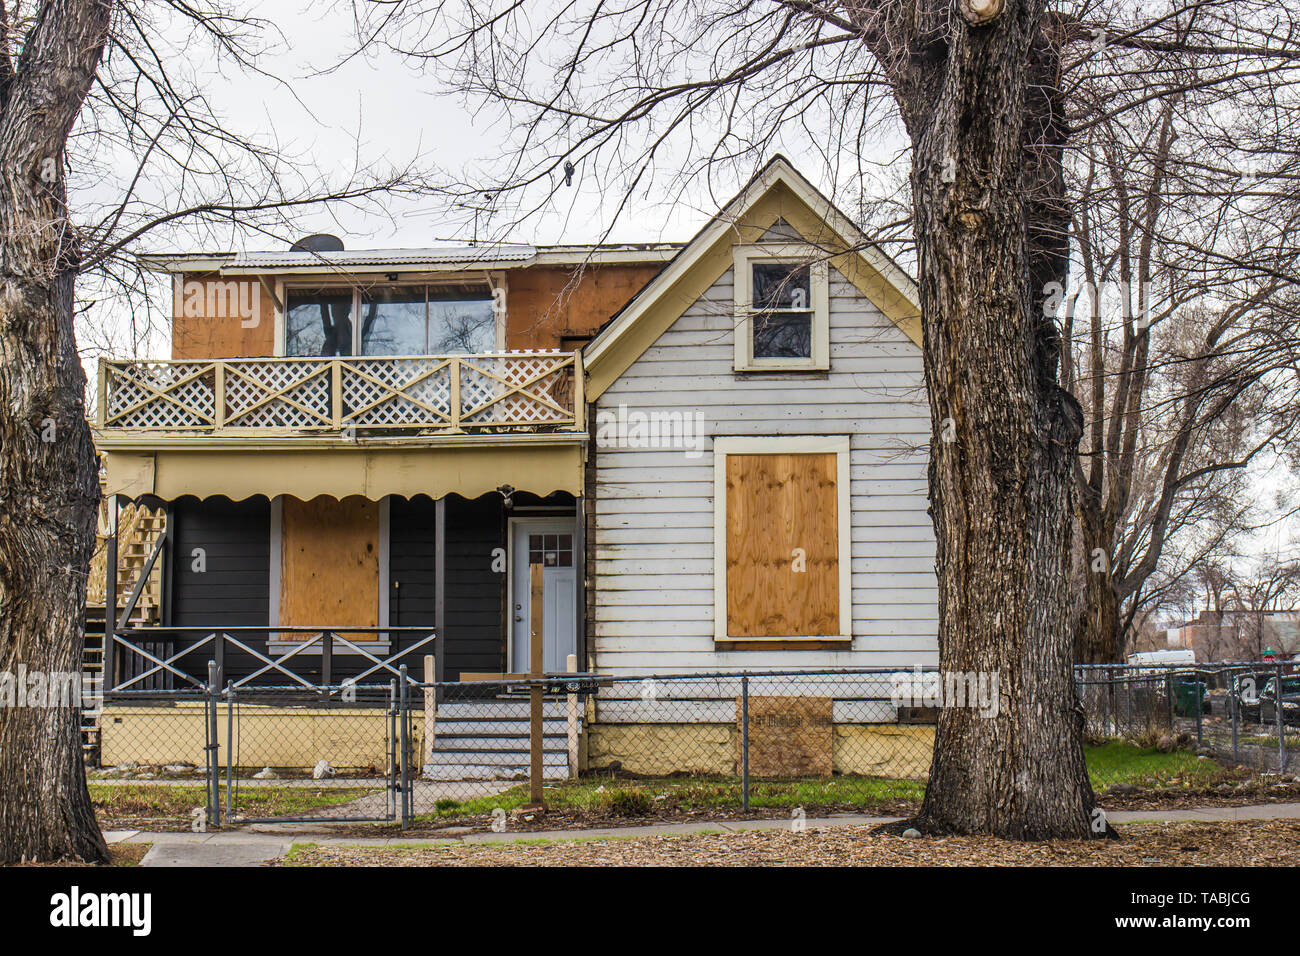 Abandoned Two Story House With Boarded Up Windows Stock Photo